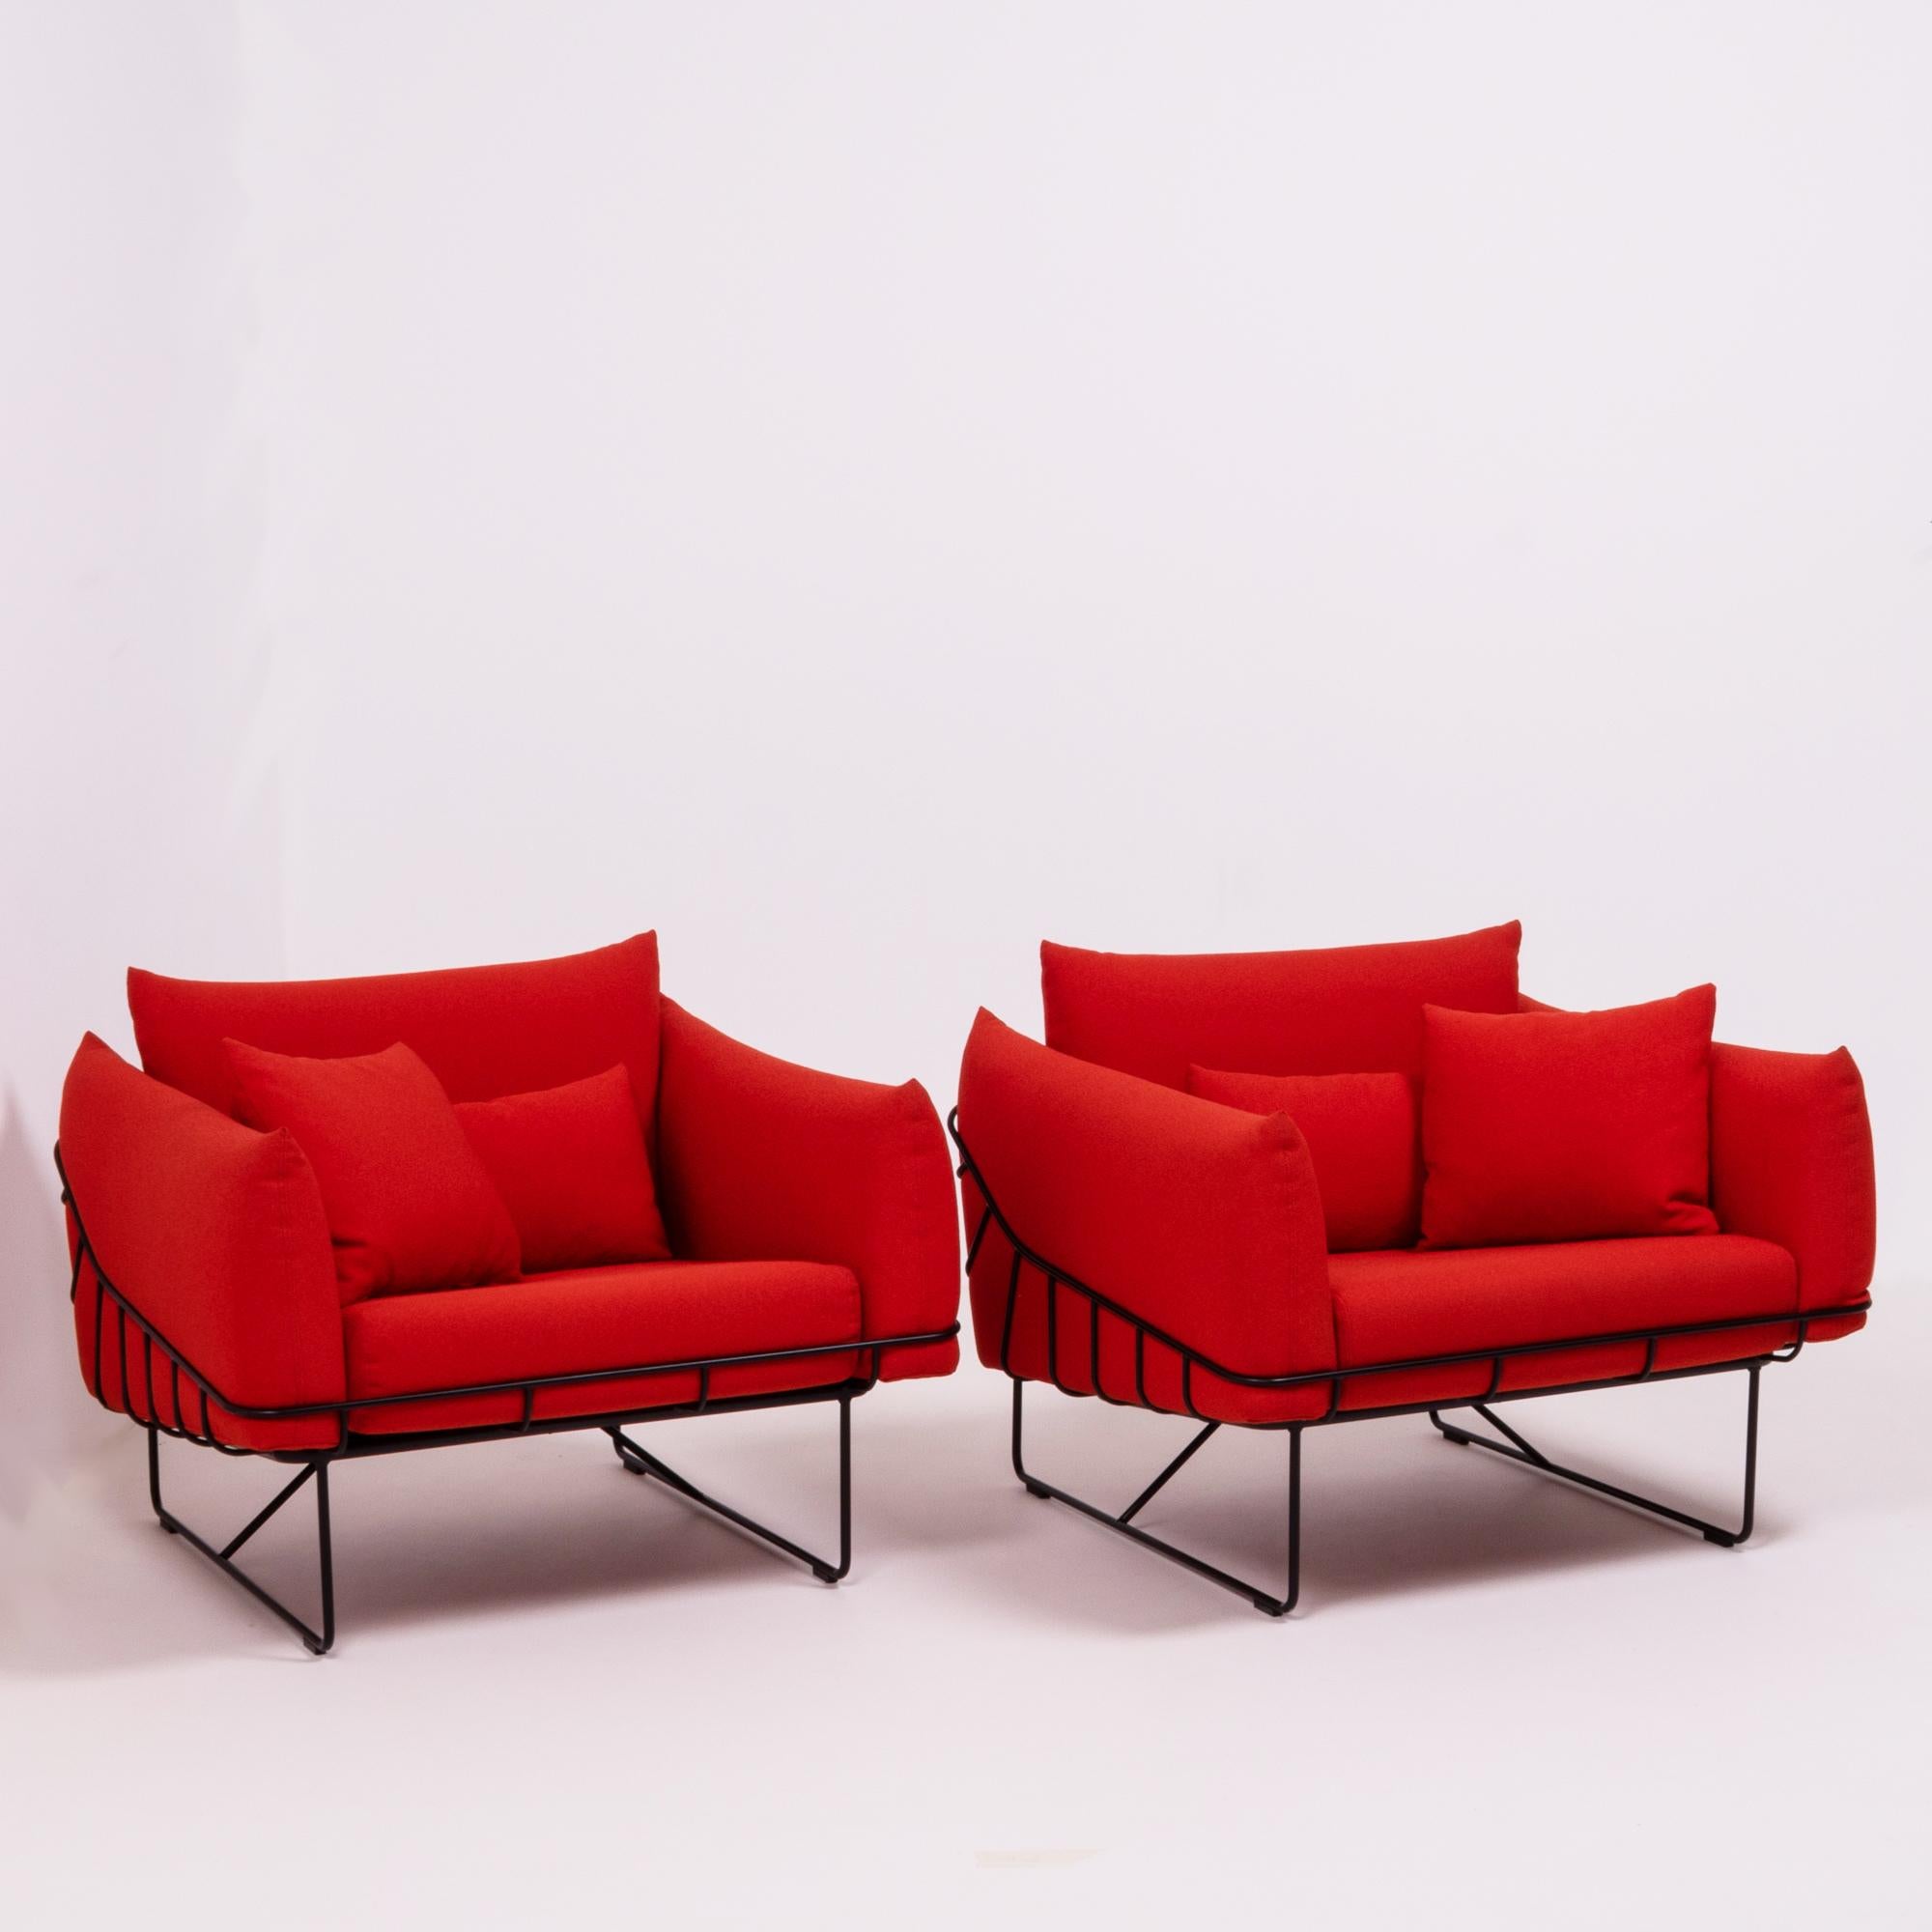 Designed by Sam Hecht and Kim Colin for Herman Miller, this set of Wireframe lounge chairs is bold and contemporary.

The structural black steel wire frame is contrasted by the soft upholstery in a bright red fabric.

Each chair has a separate